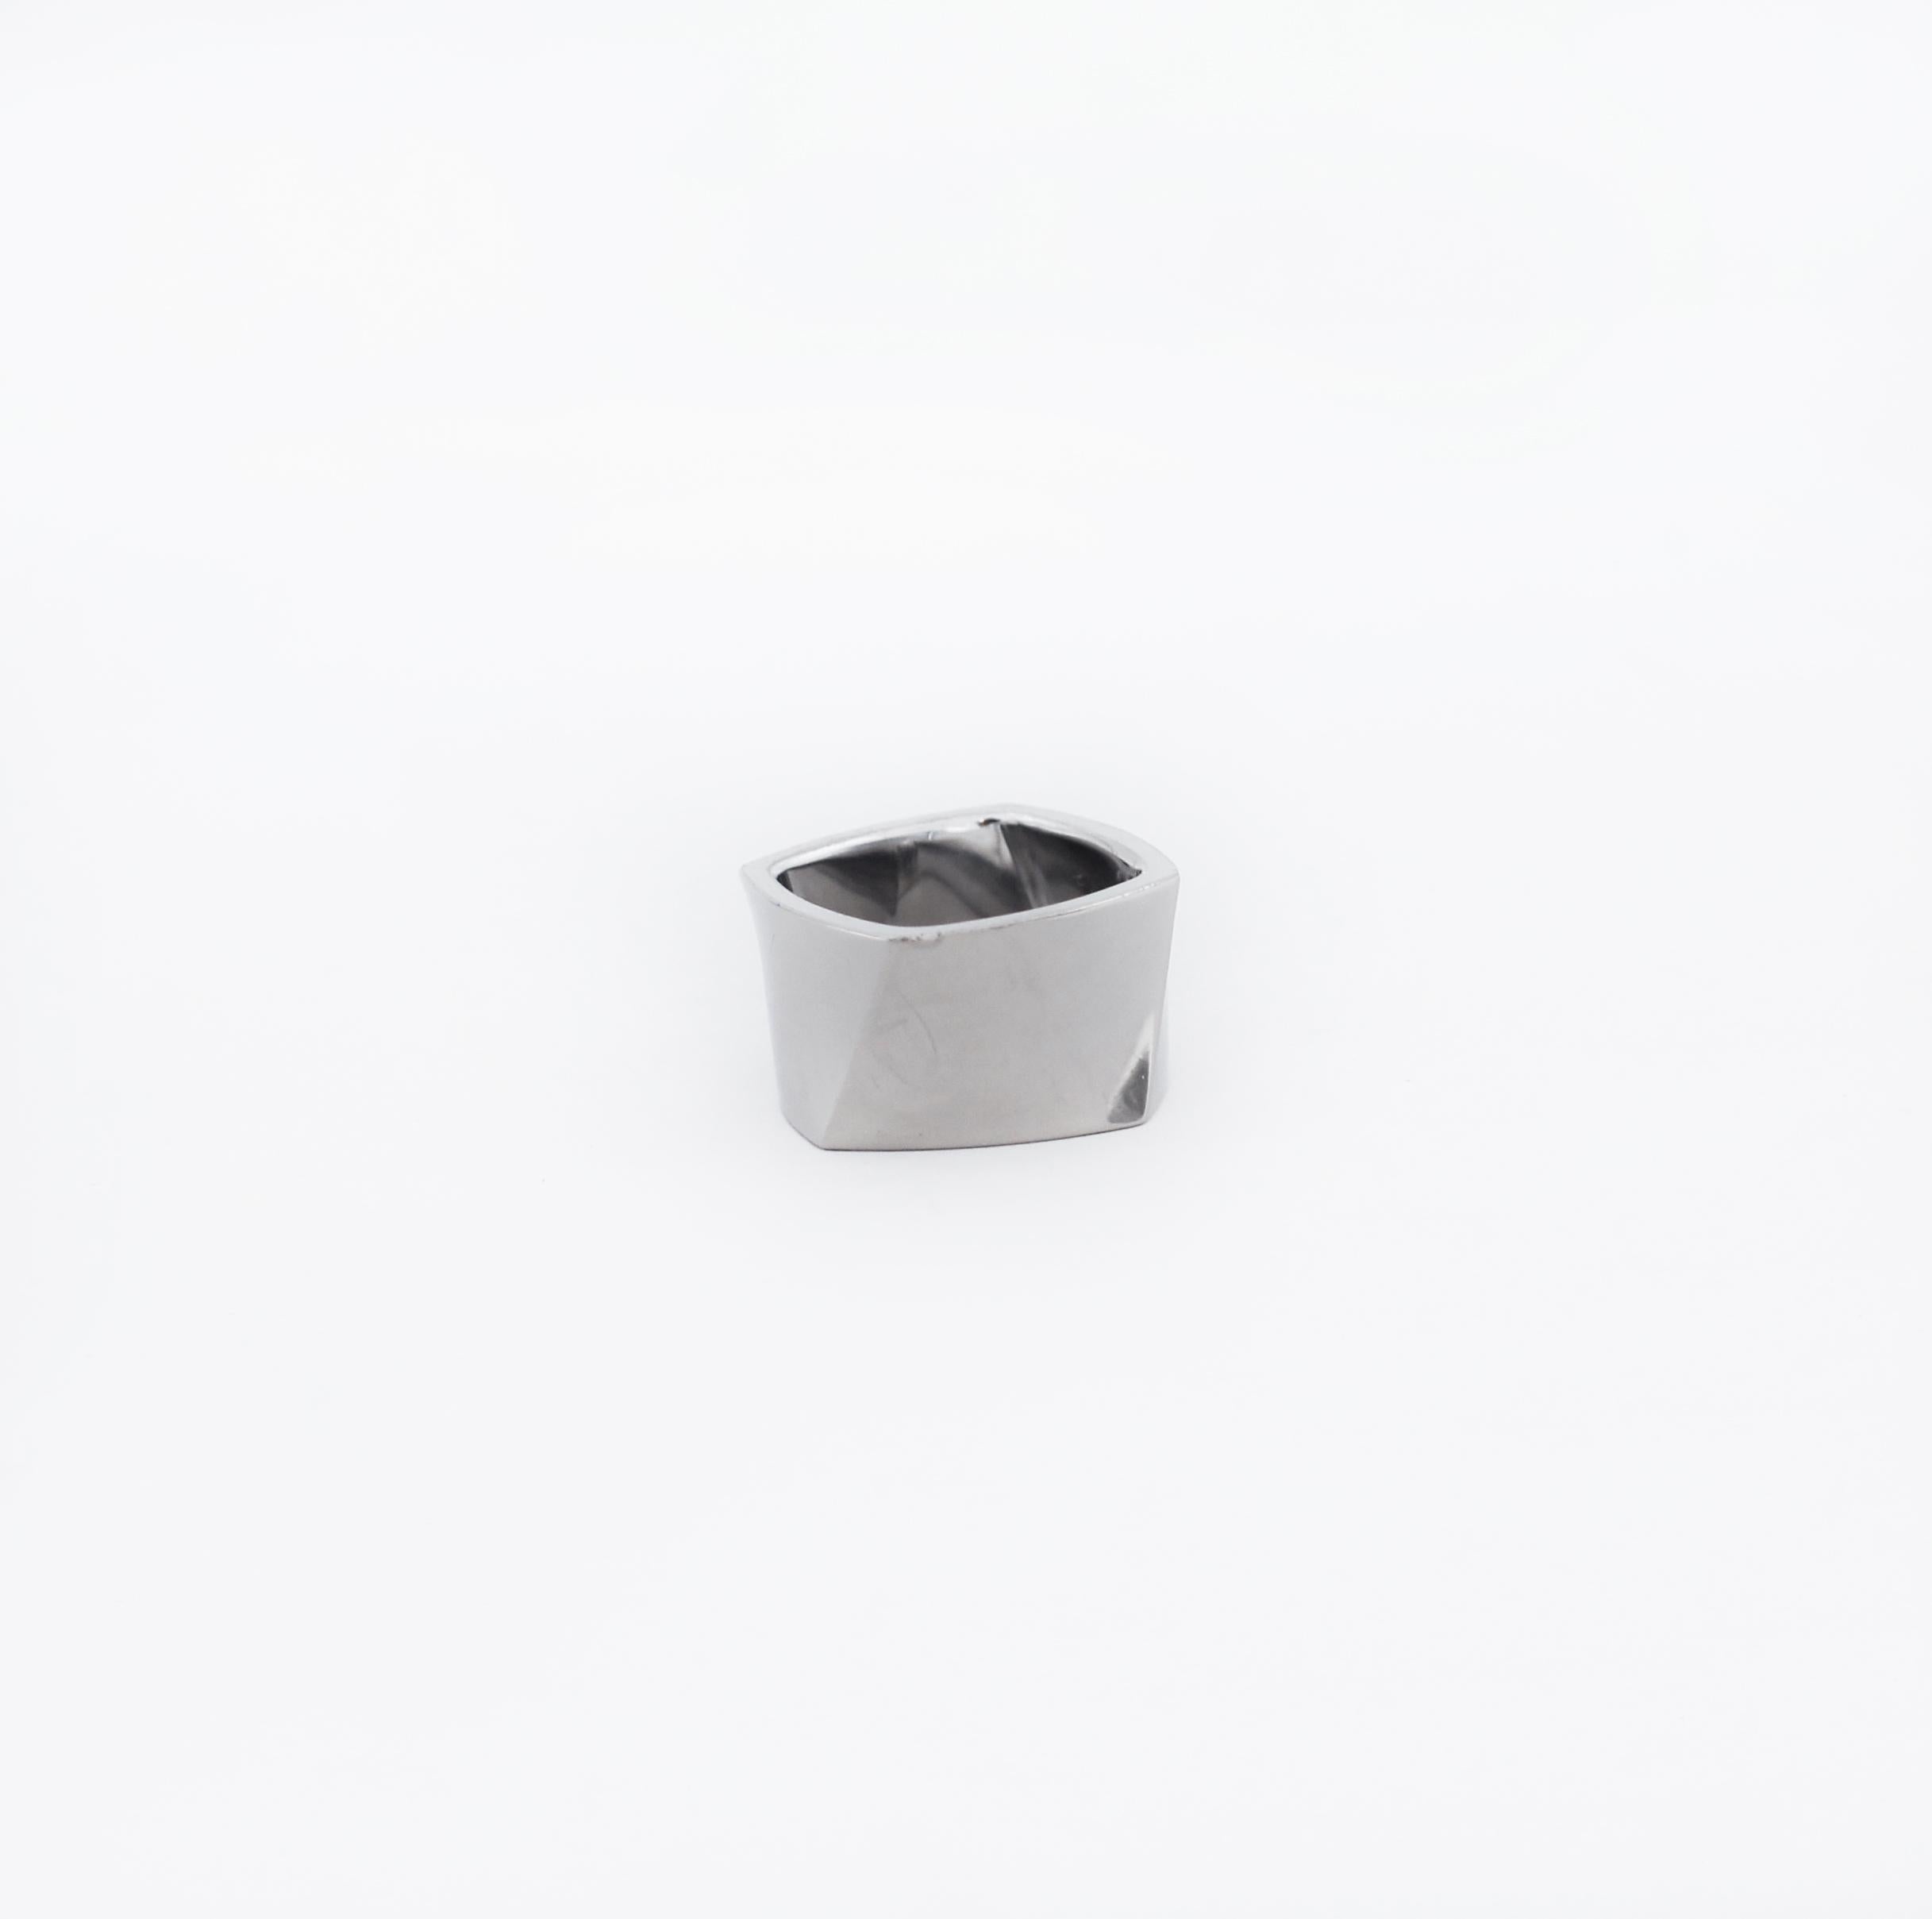 TIFFANY & Co.
Frank Gehry
Torque RIng
Stylized wide band ring
Slightly twisted sides create four dynamic and brightly polished surfaces
Hallmarked: T & Co. Gehry 750
Circa: Approx. 2006
18K White Gold
Ring Size: 6.5 US
Approx. Measures: 12 mm wide